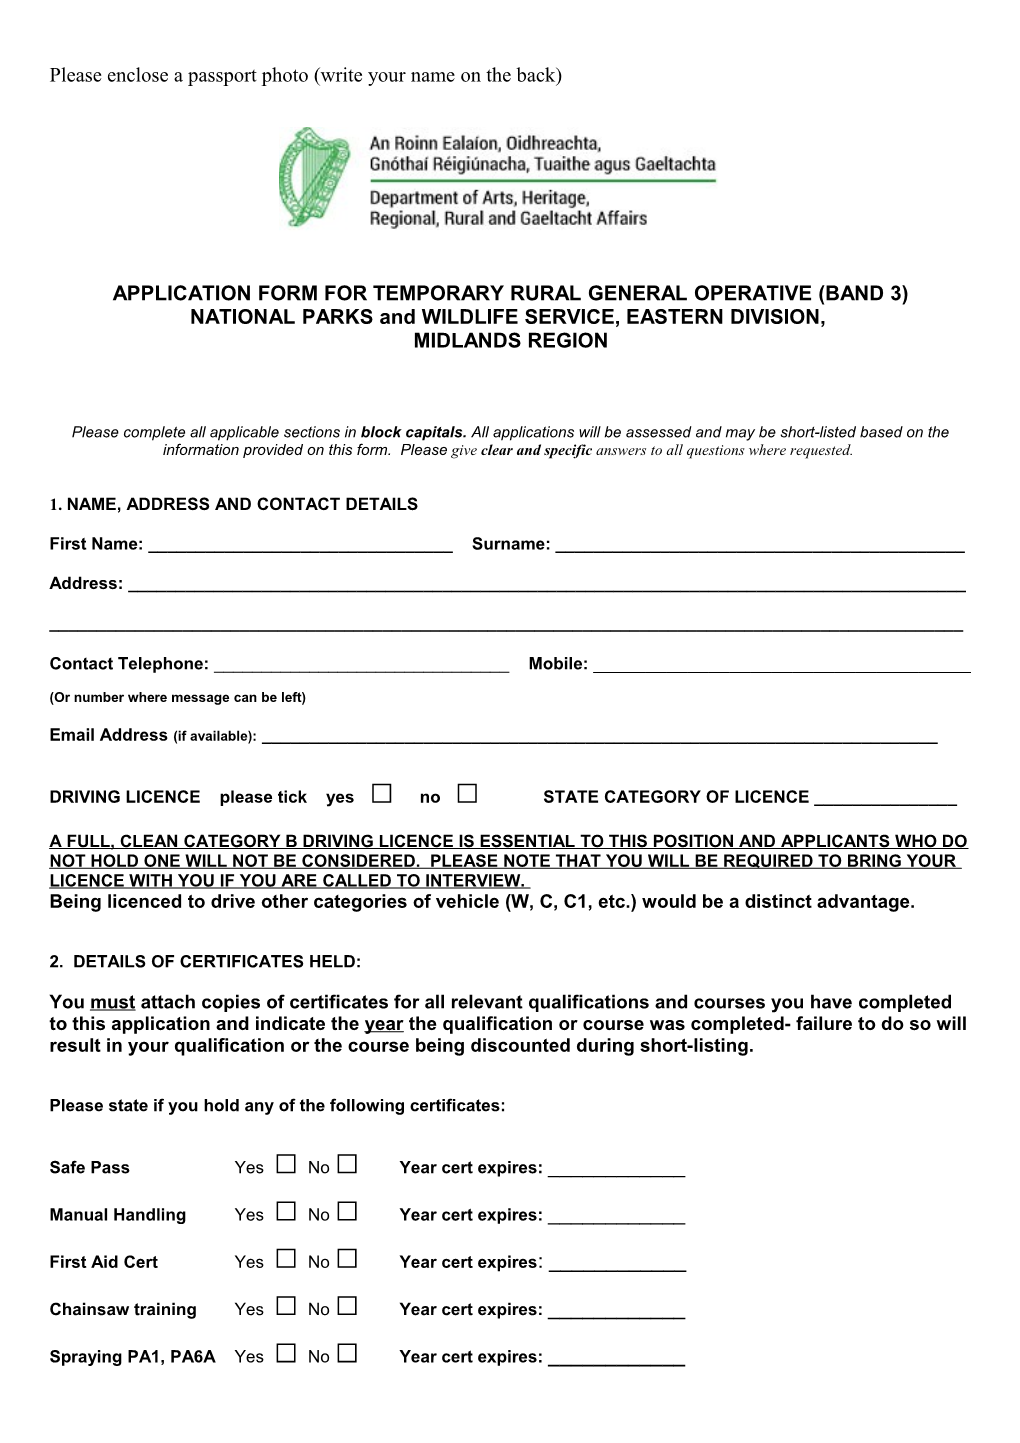 Application Form for Temporary Ruralgeneral Operative(Band 3)